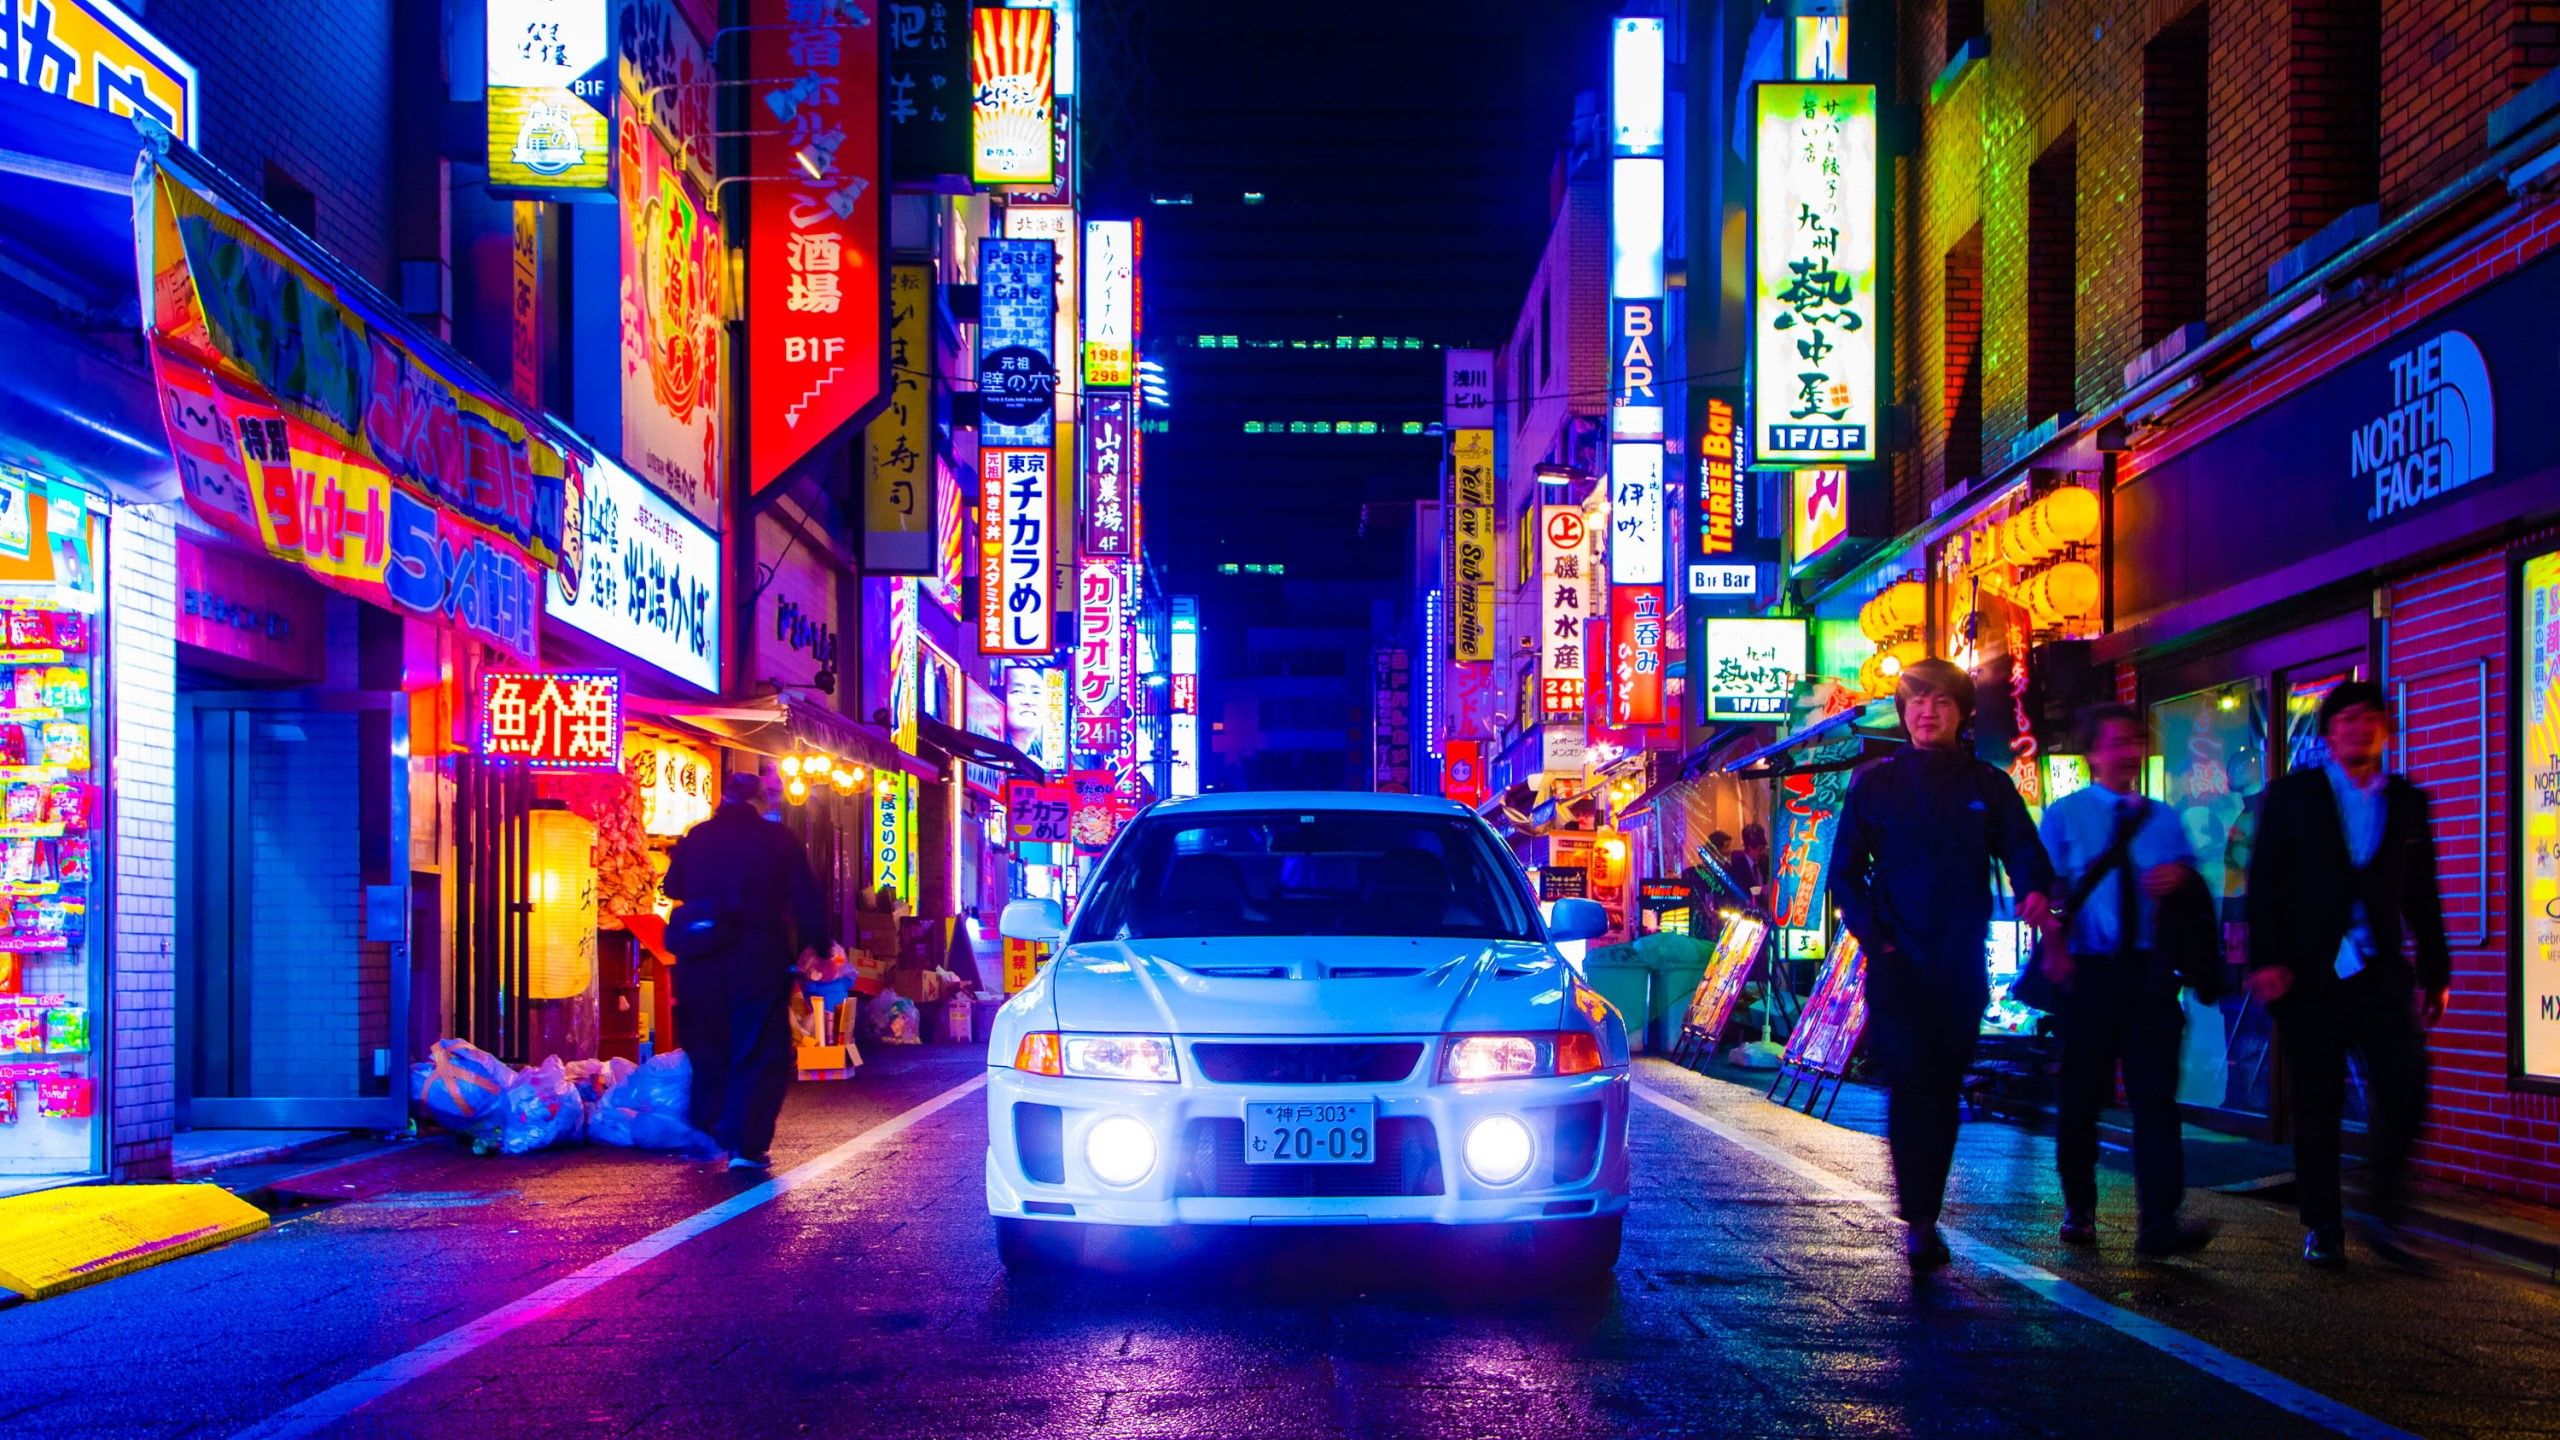 Tokyo at night with a car and neon signs - JDM